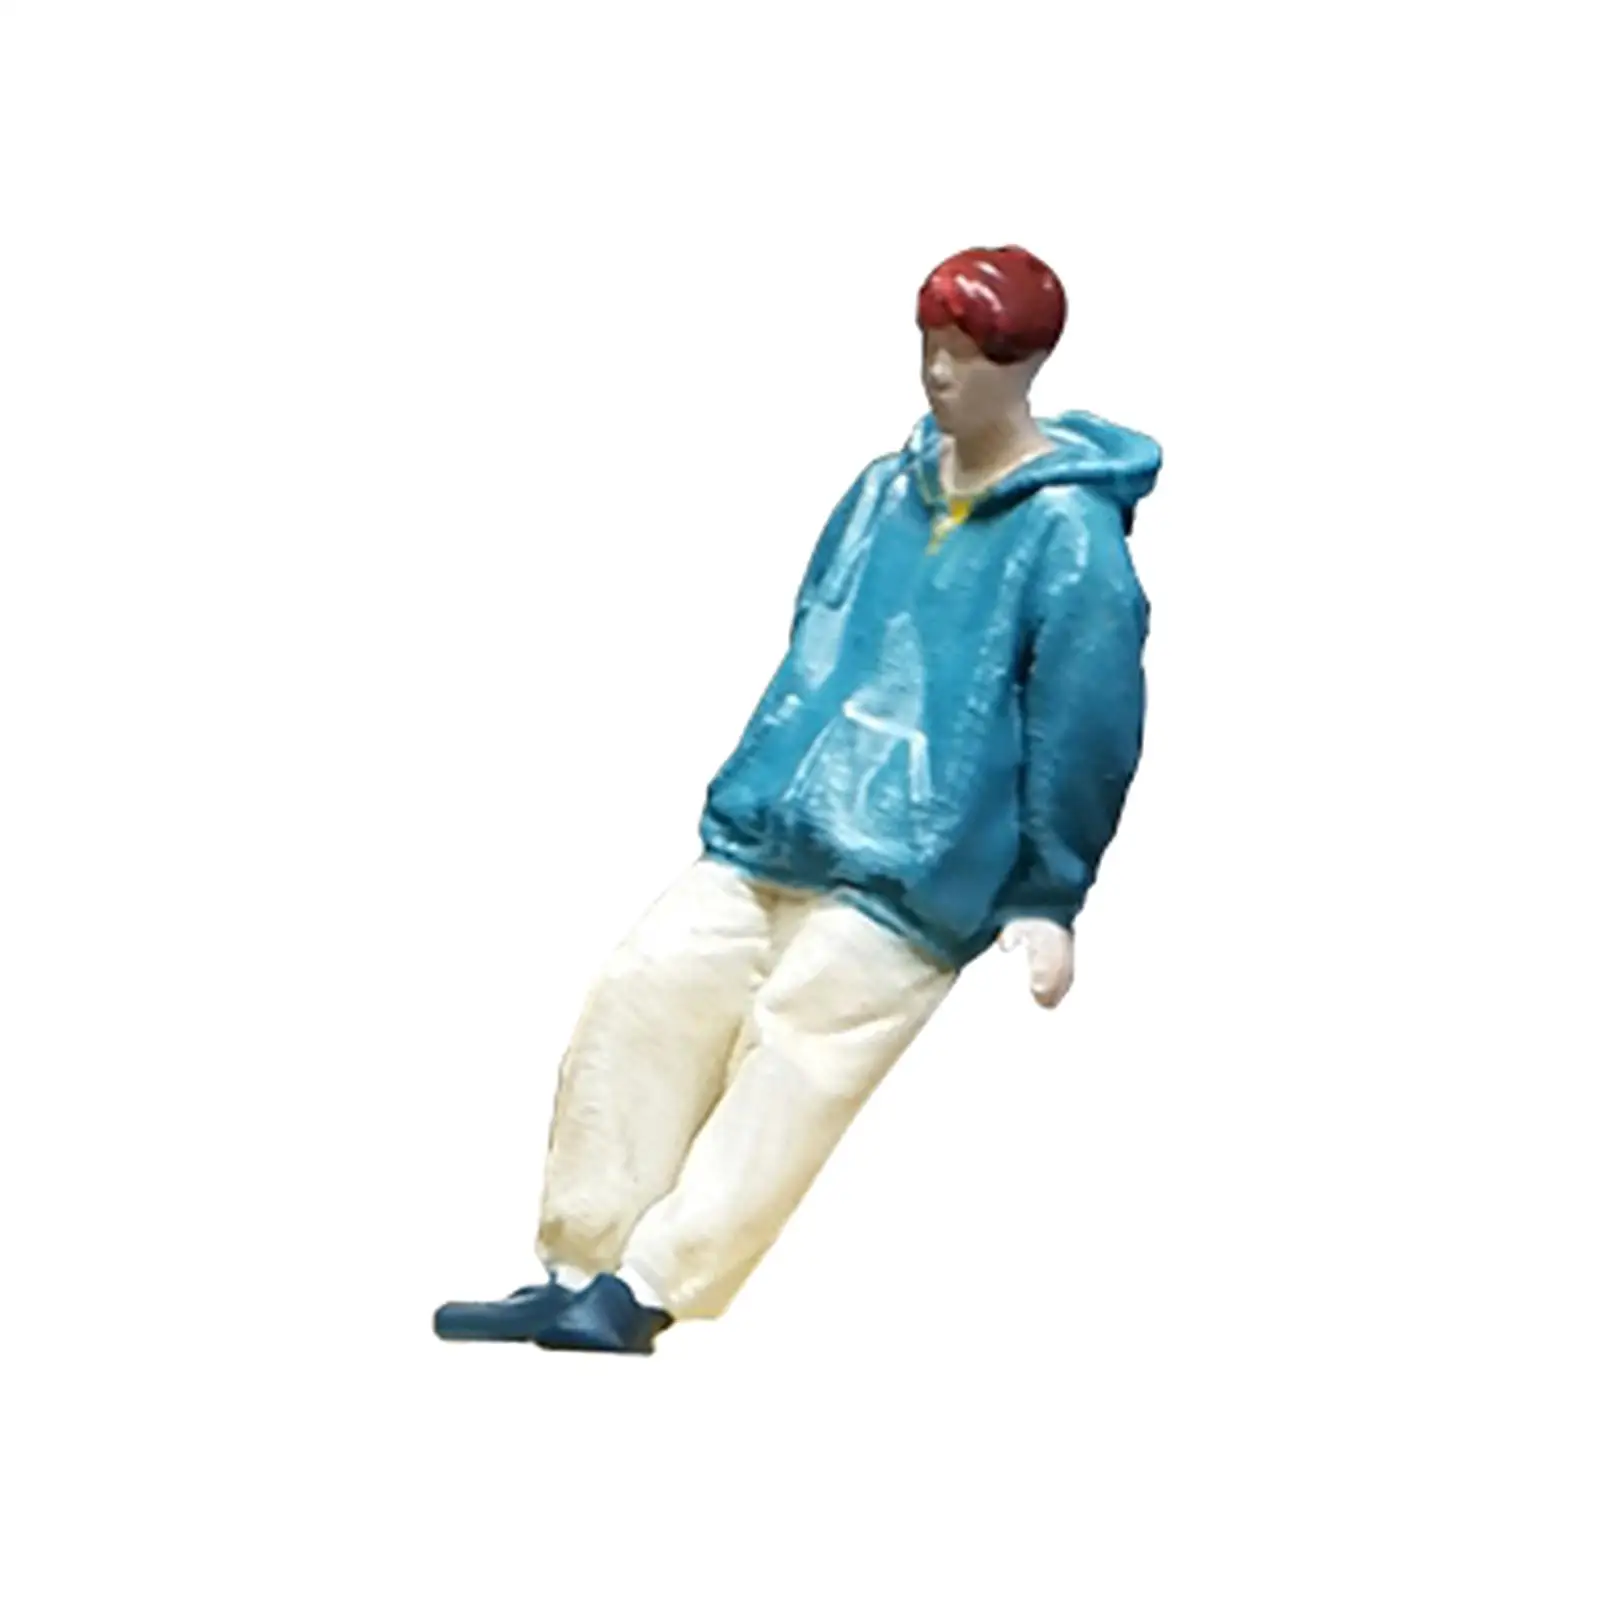 1/64 Resin Boys Model Street Figure, Diorama Action Figurines, Collectibles Scene Props